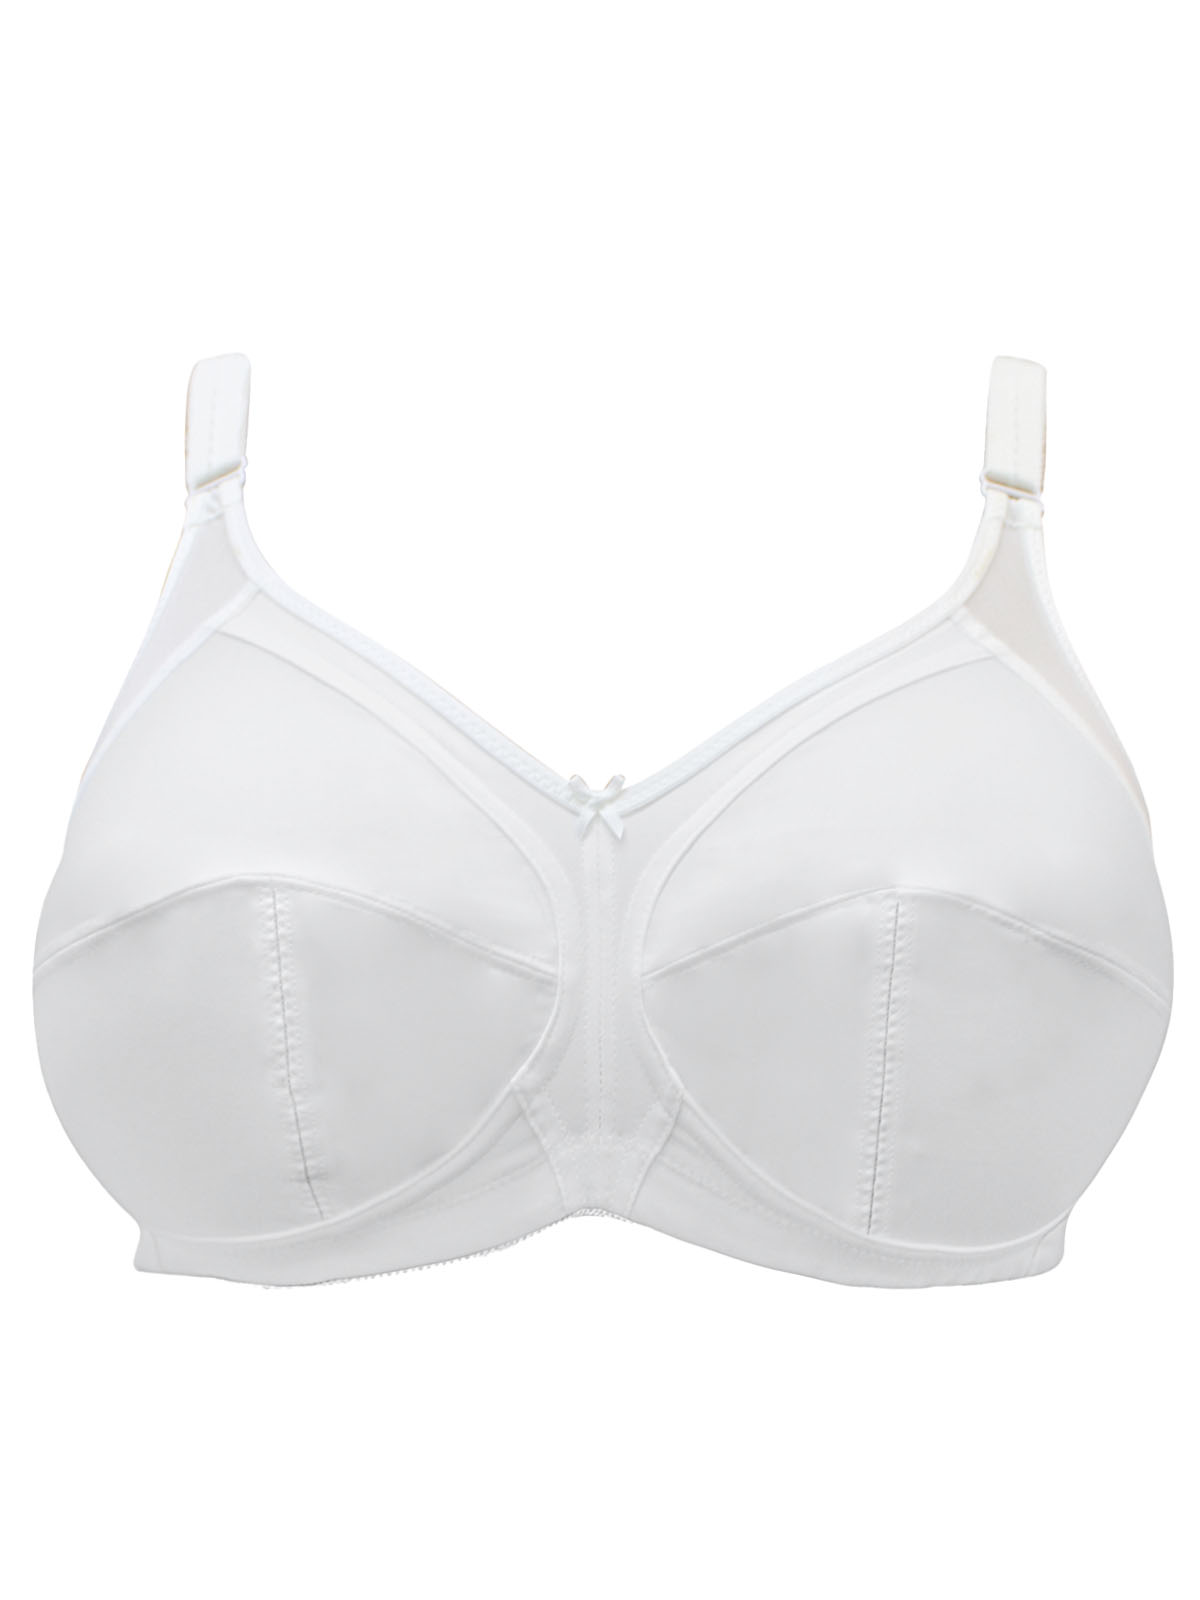 Comfy Bras 34c Cup Long Sleeve Bra top 36a Bra Size Ribbed Bralette high  Support Sports Bra for Big Bust White Racer Back Bra Full Cup t Shirt Bra  Handful Bras Demi